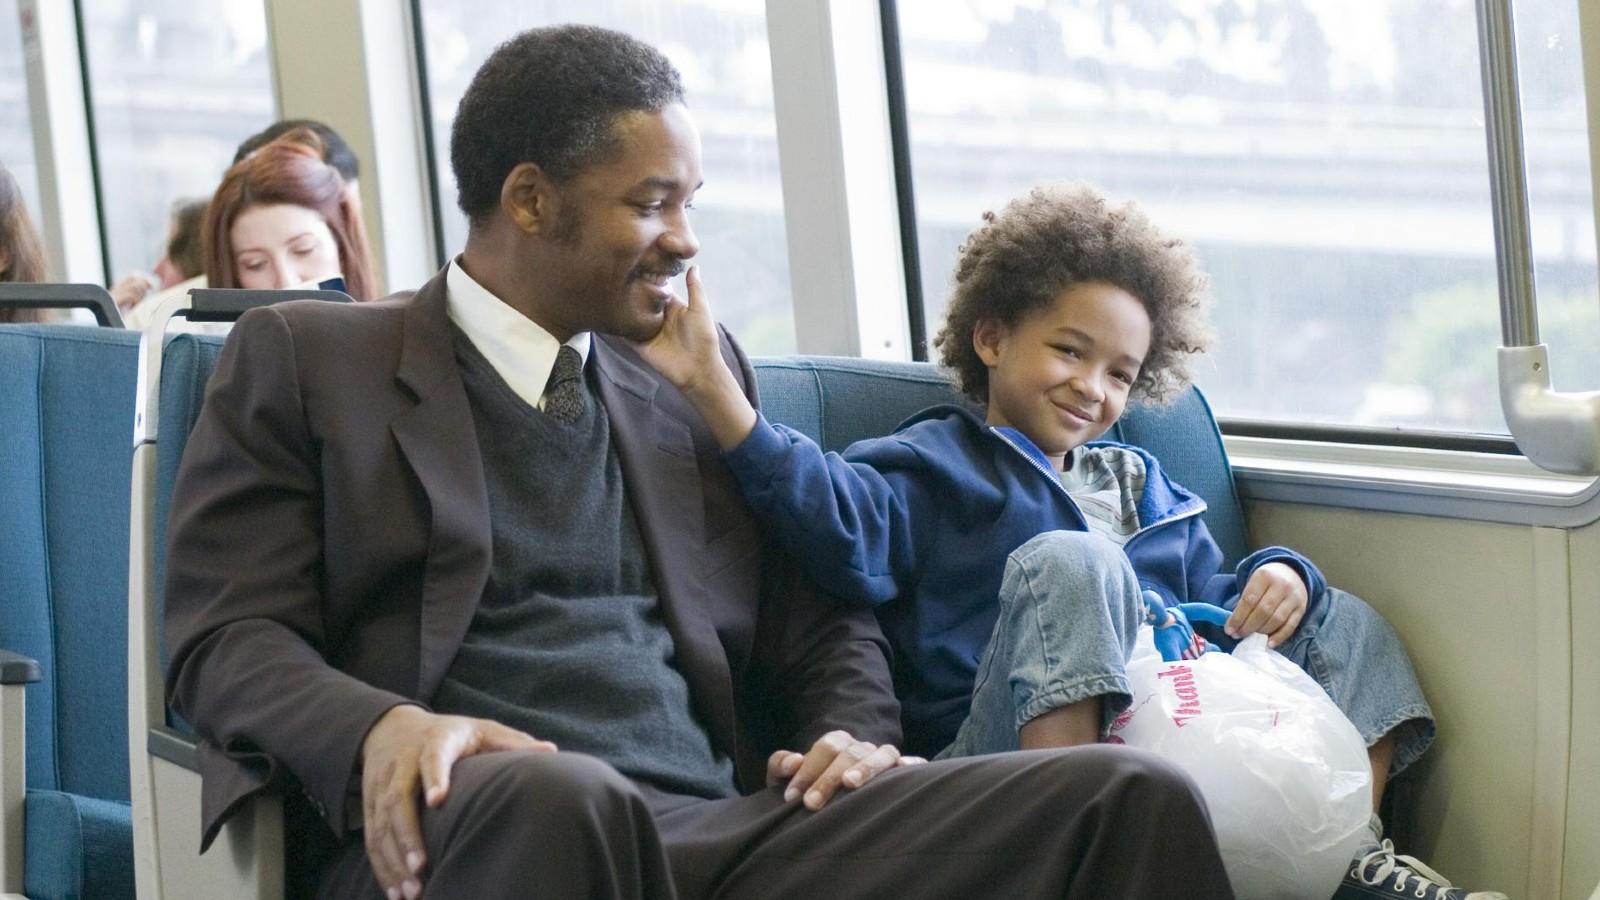 A still from The Pursuit of Happyness